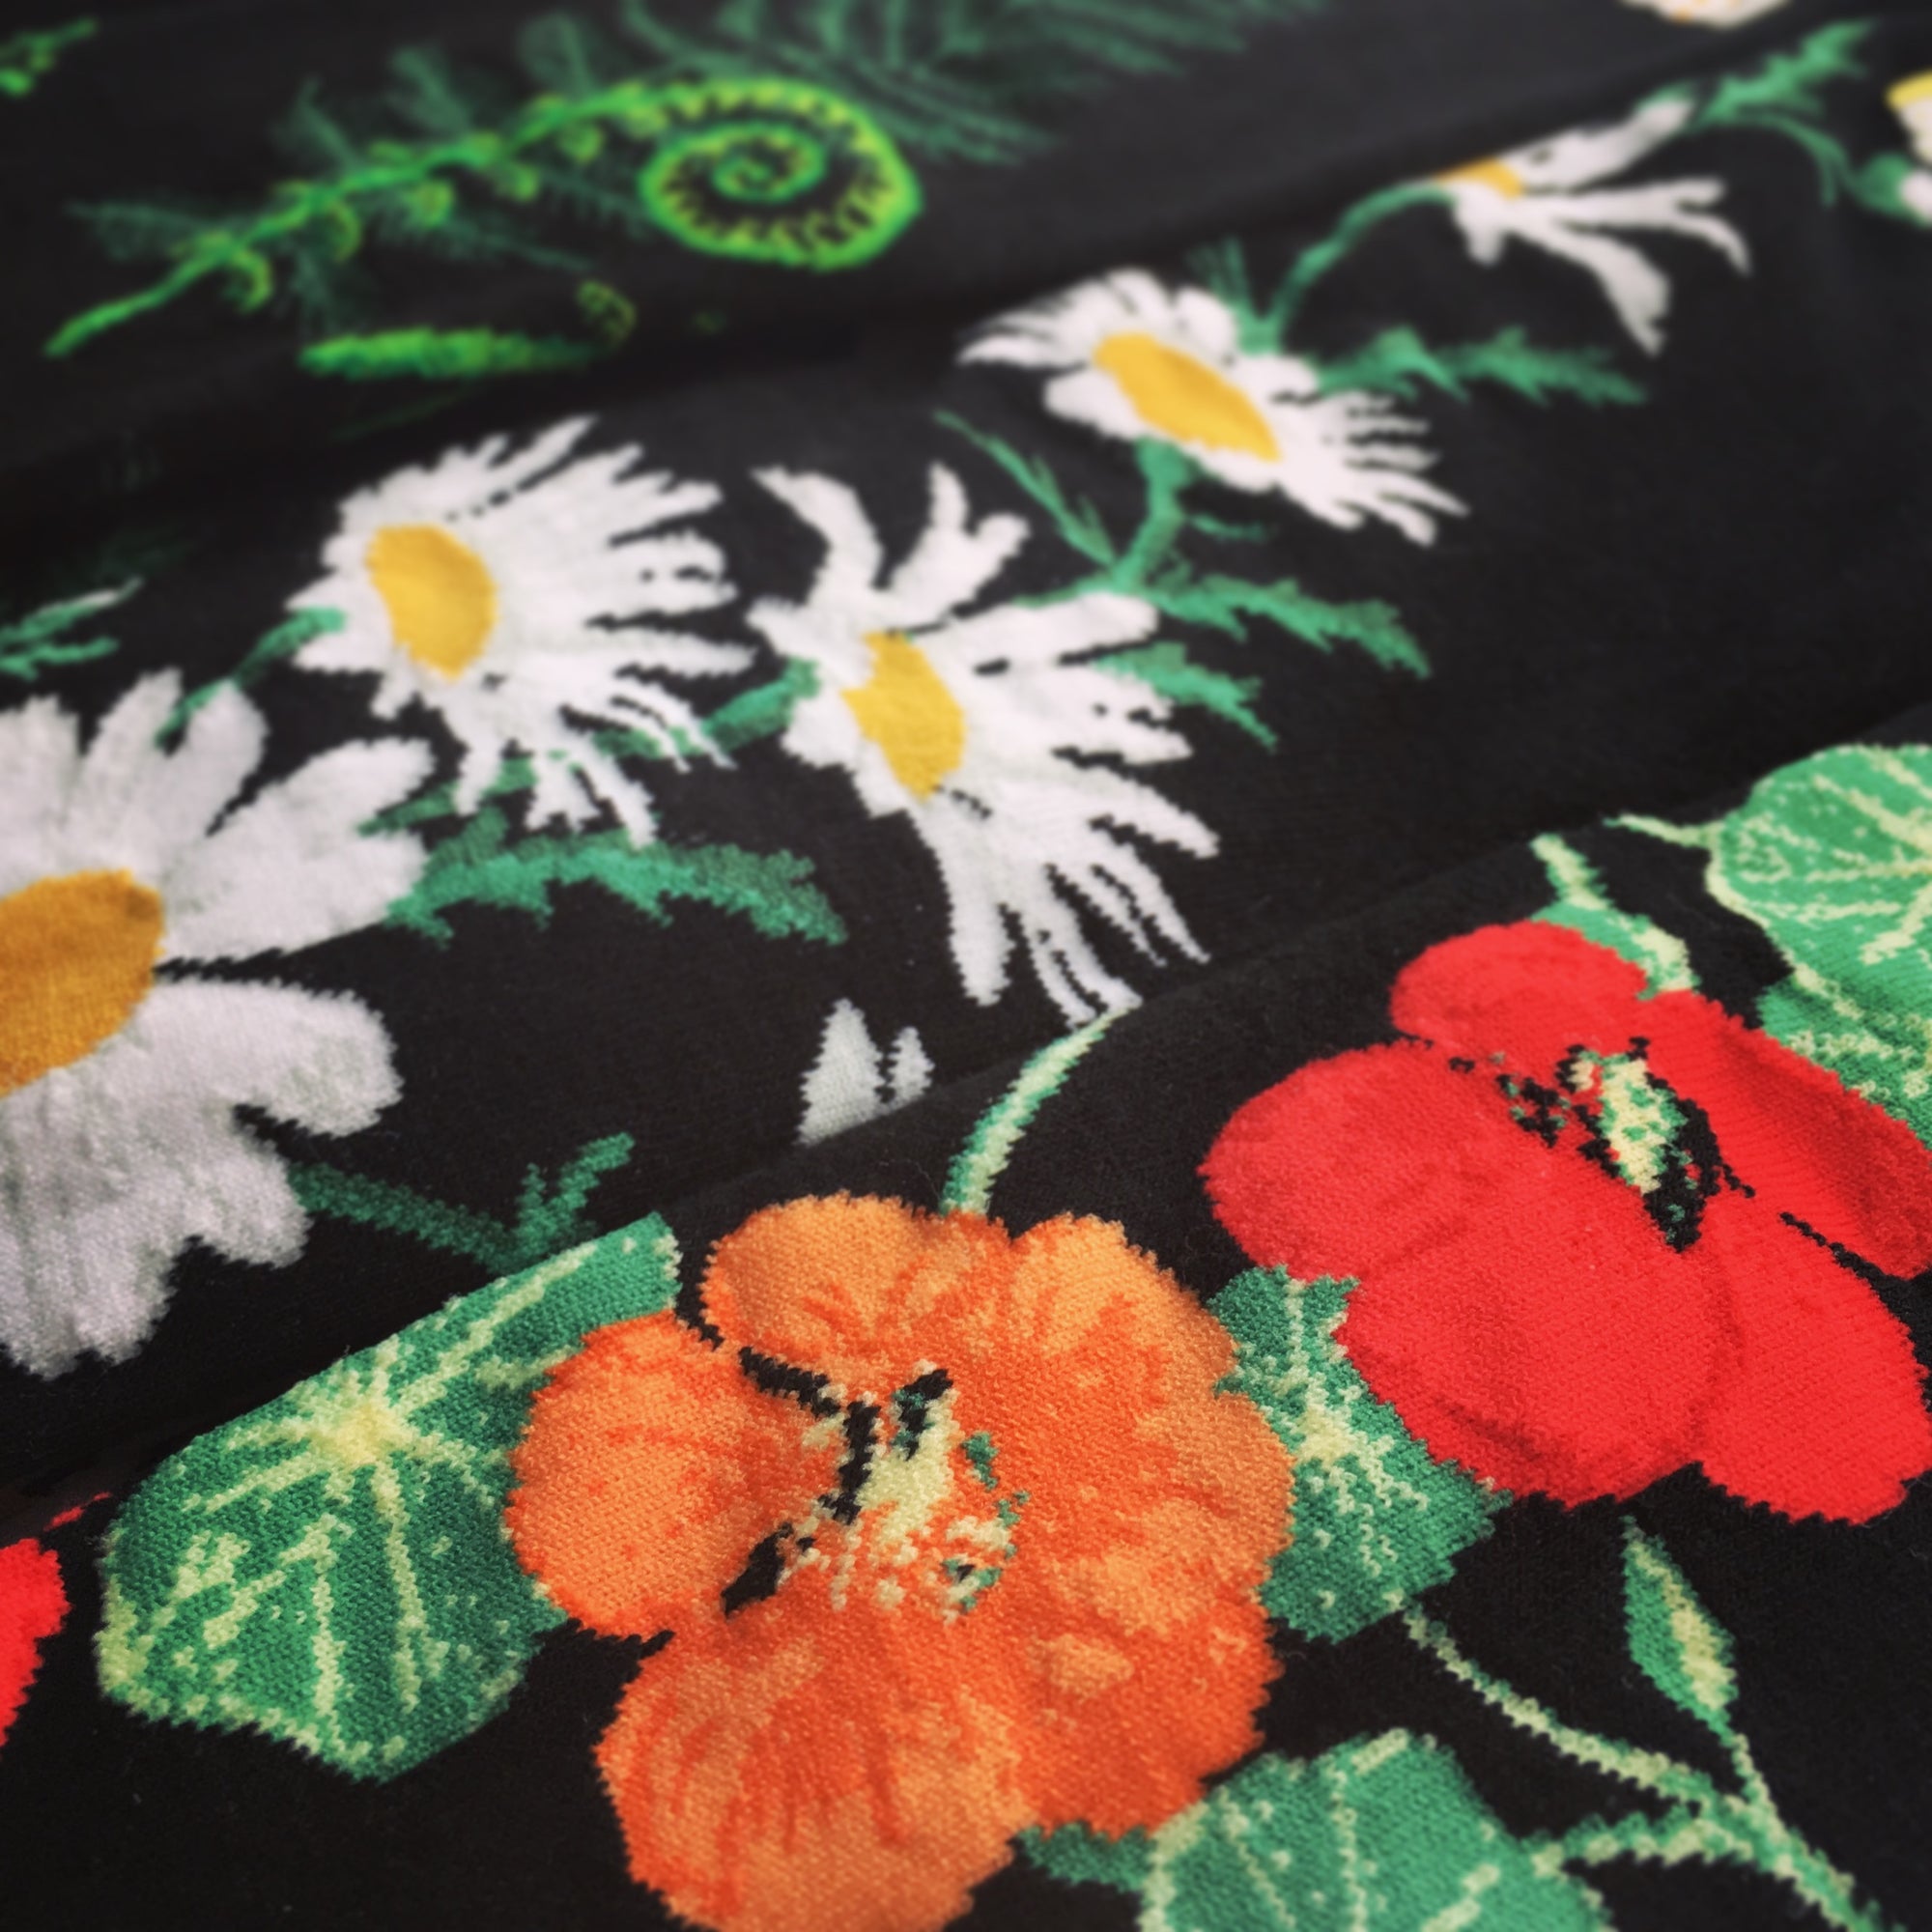 This Flower Garden Collection shows off garden and plant themed socks, including these 3 ModSocks knee highs that have black backgrounds. The front shows off red and orange nasturtiums, the 2nd white and yellow daisies, the 3rd green ferns and fiddleheads